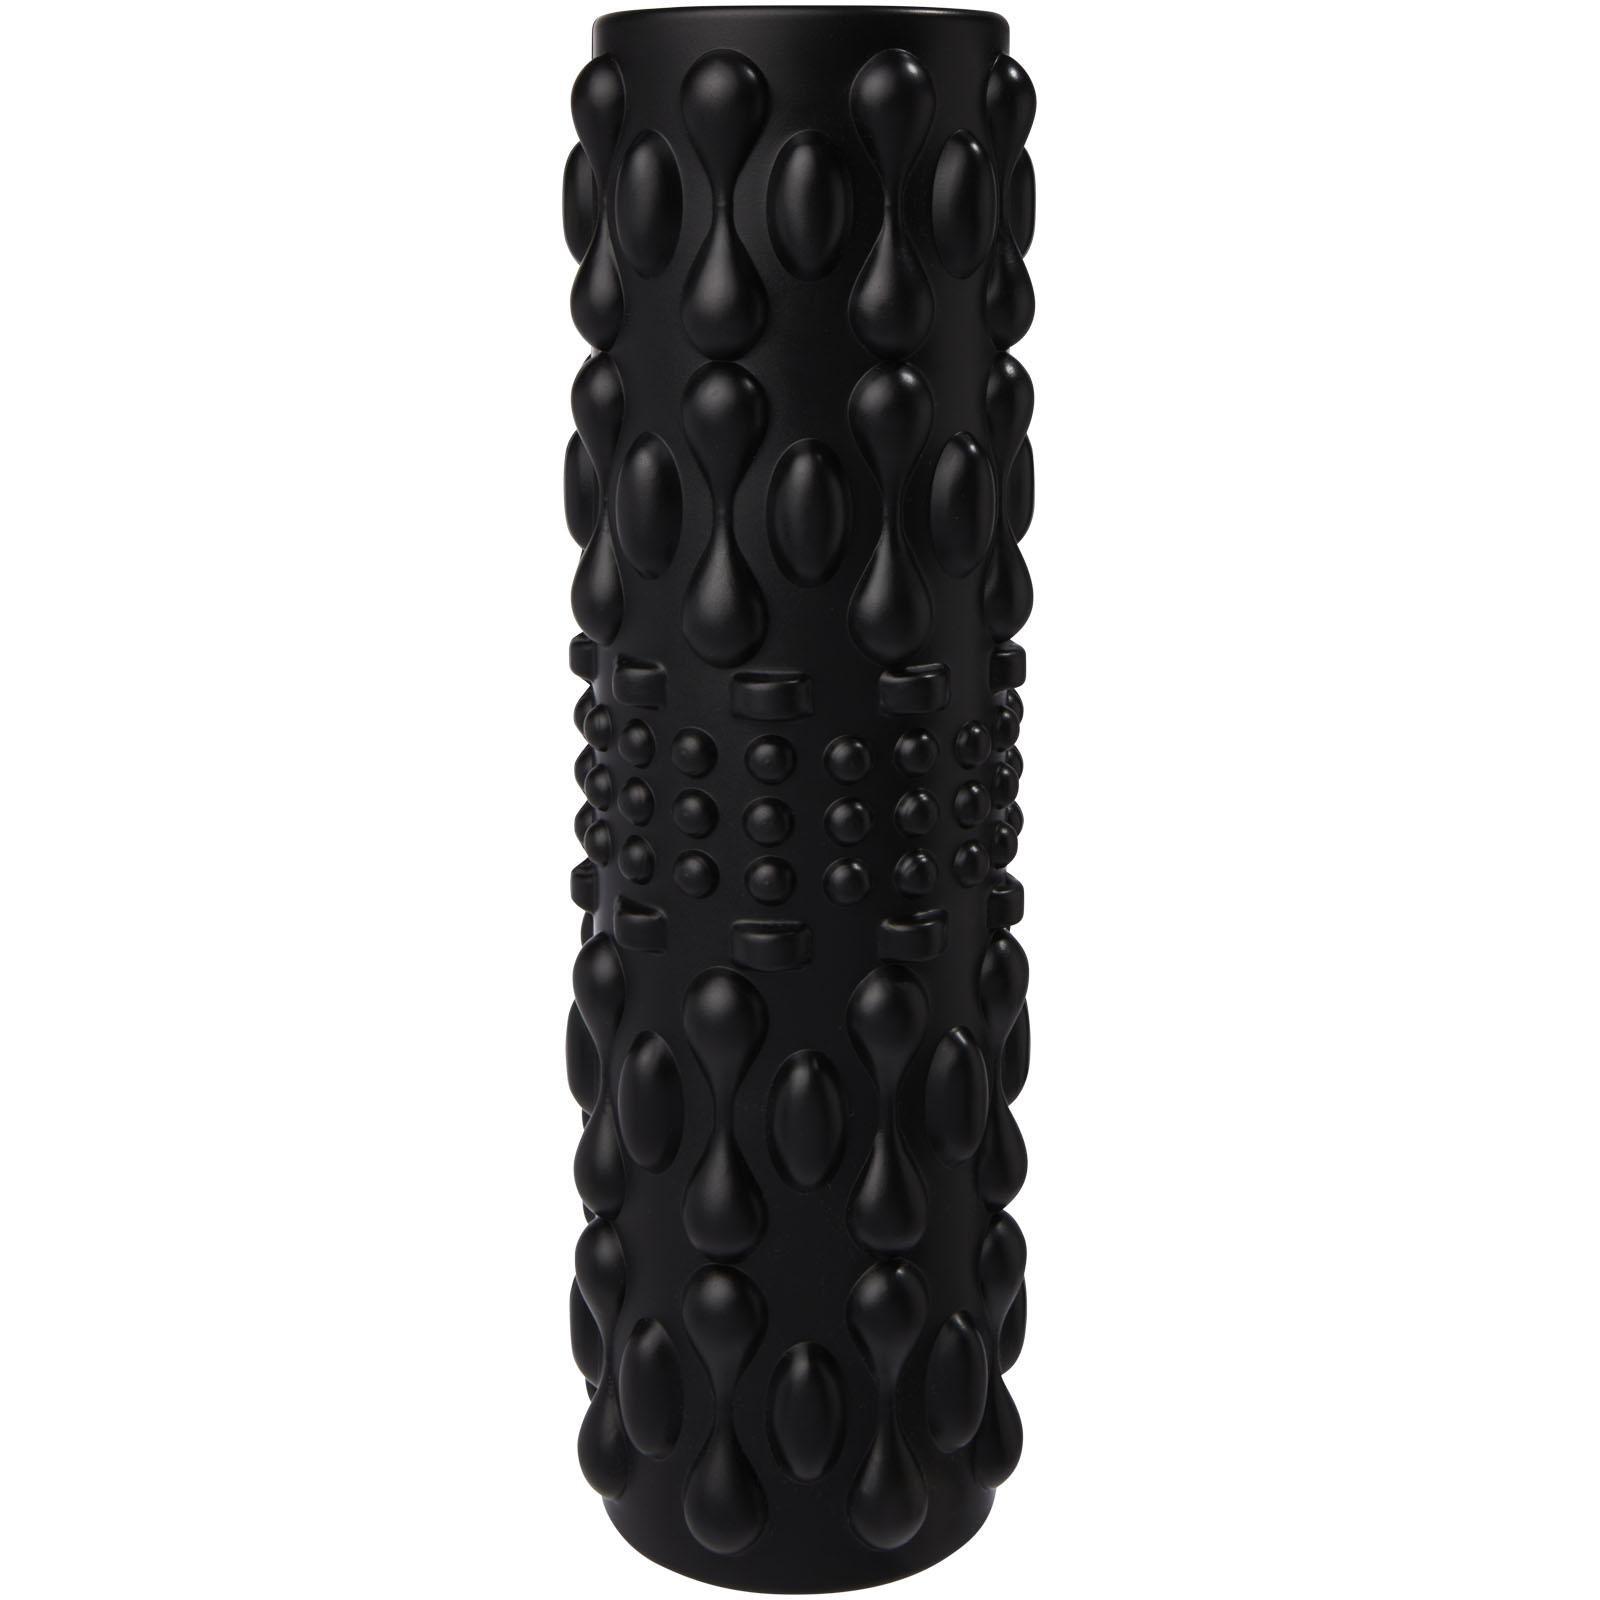 Advertising Personal Care - Rollfit vibrating mobility roller - 2